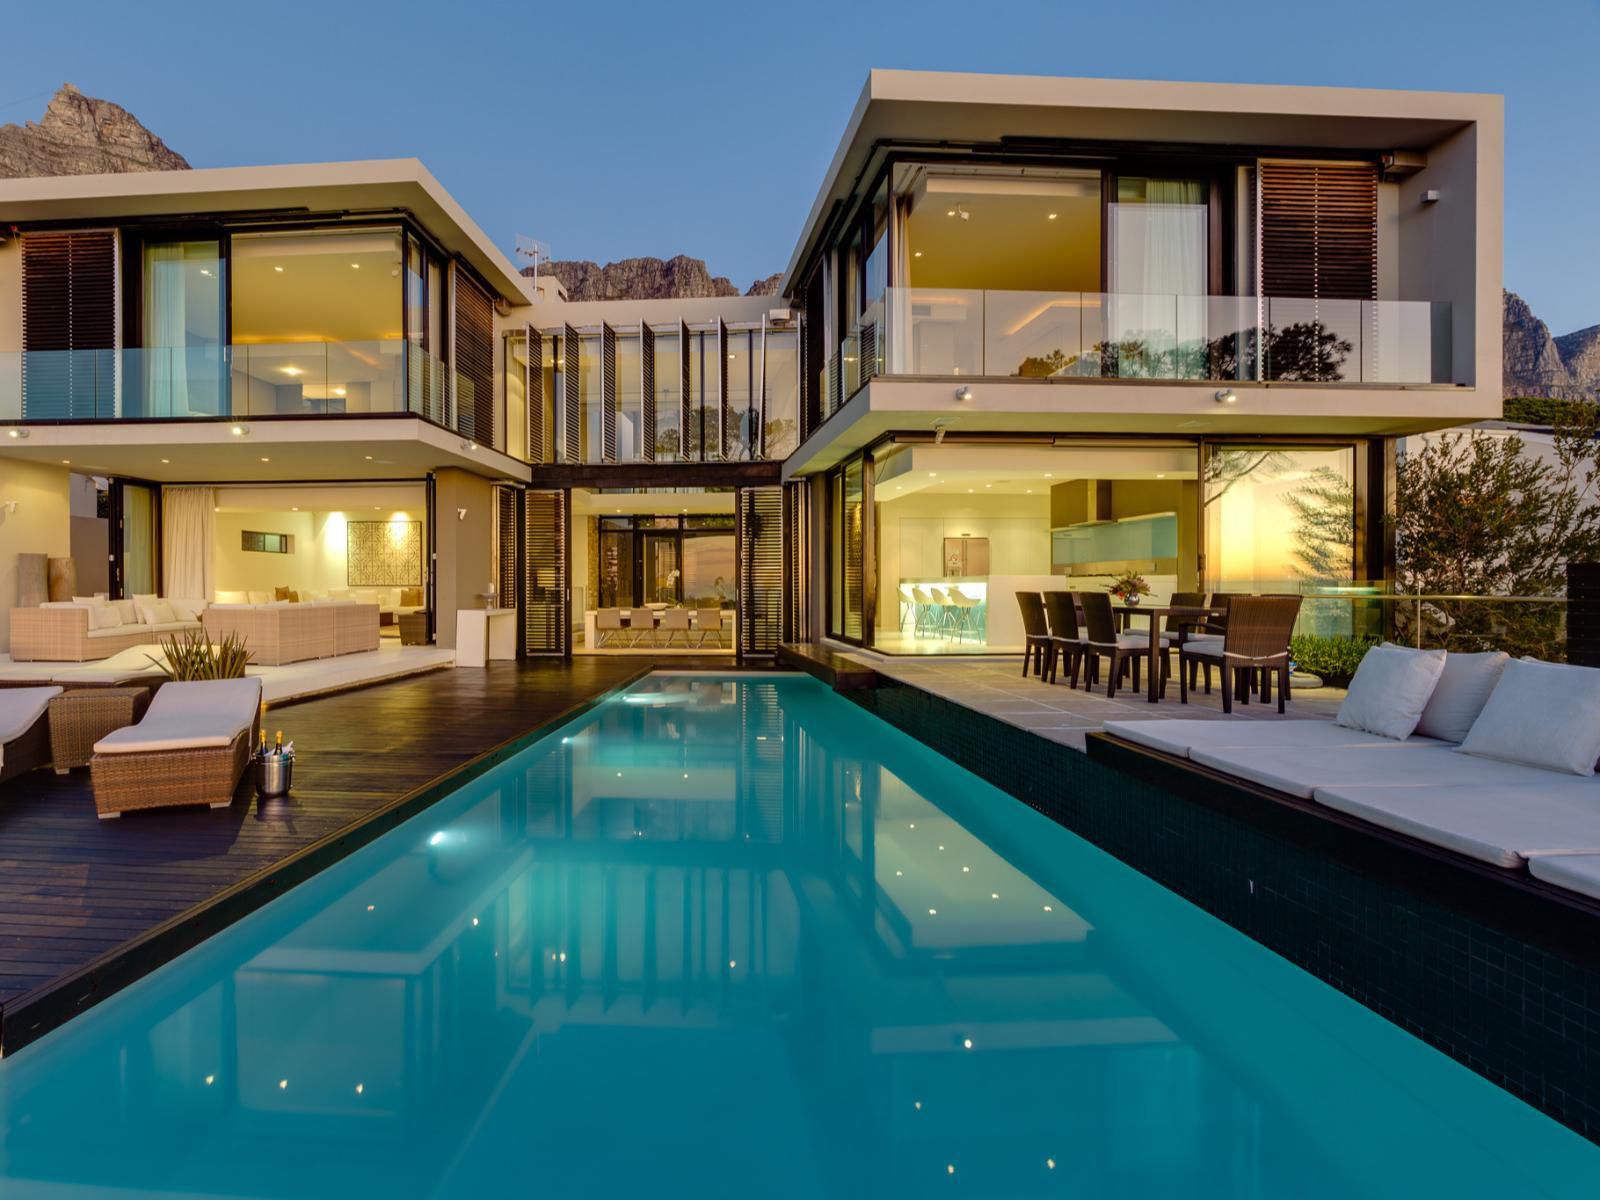 Serenity Villa Camps Bay Cape Town Western Cape South Africa Complementary Colors, House, Building, Architecture, Swimming Pool